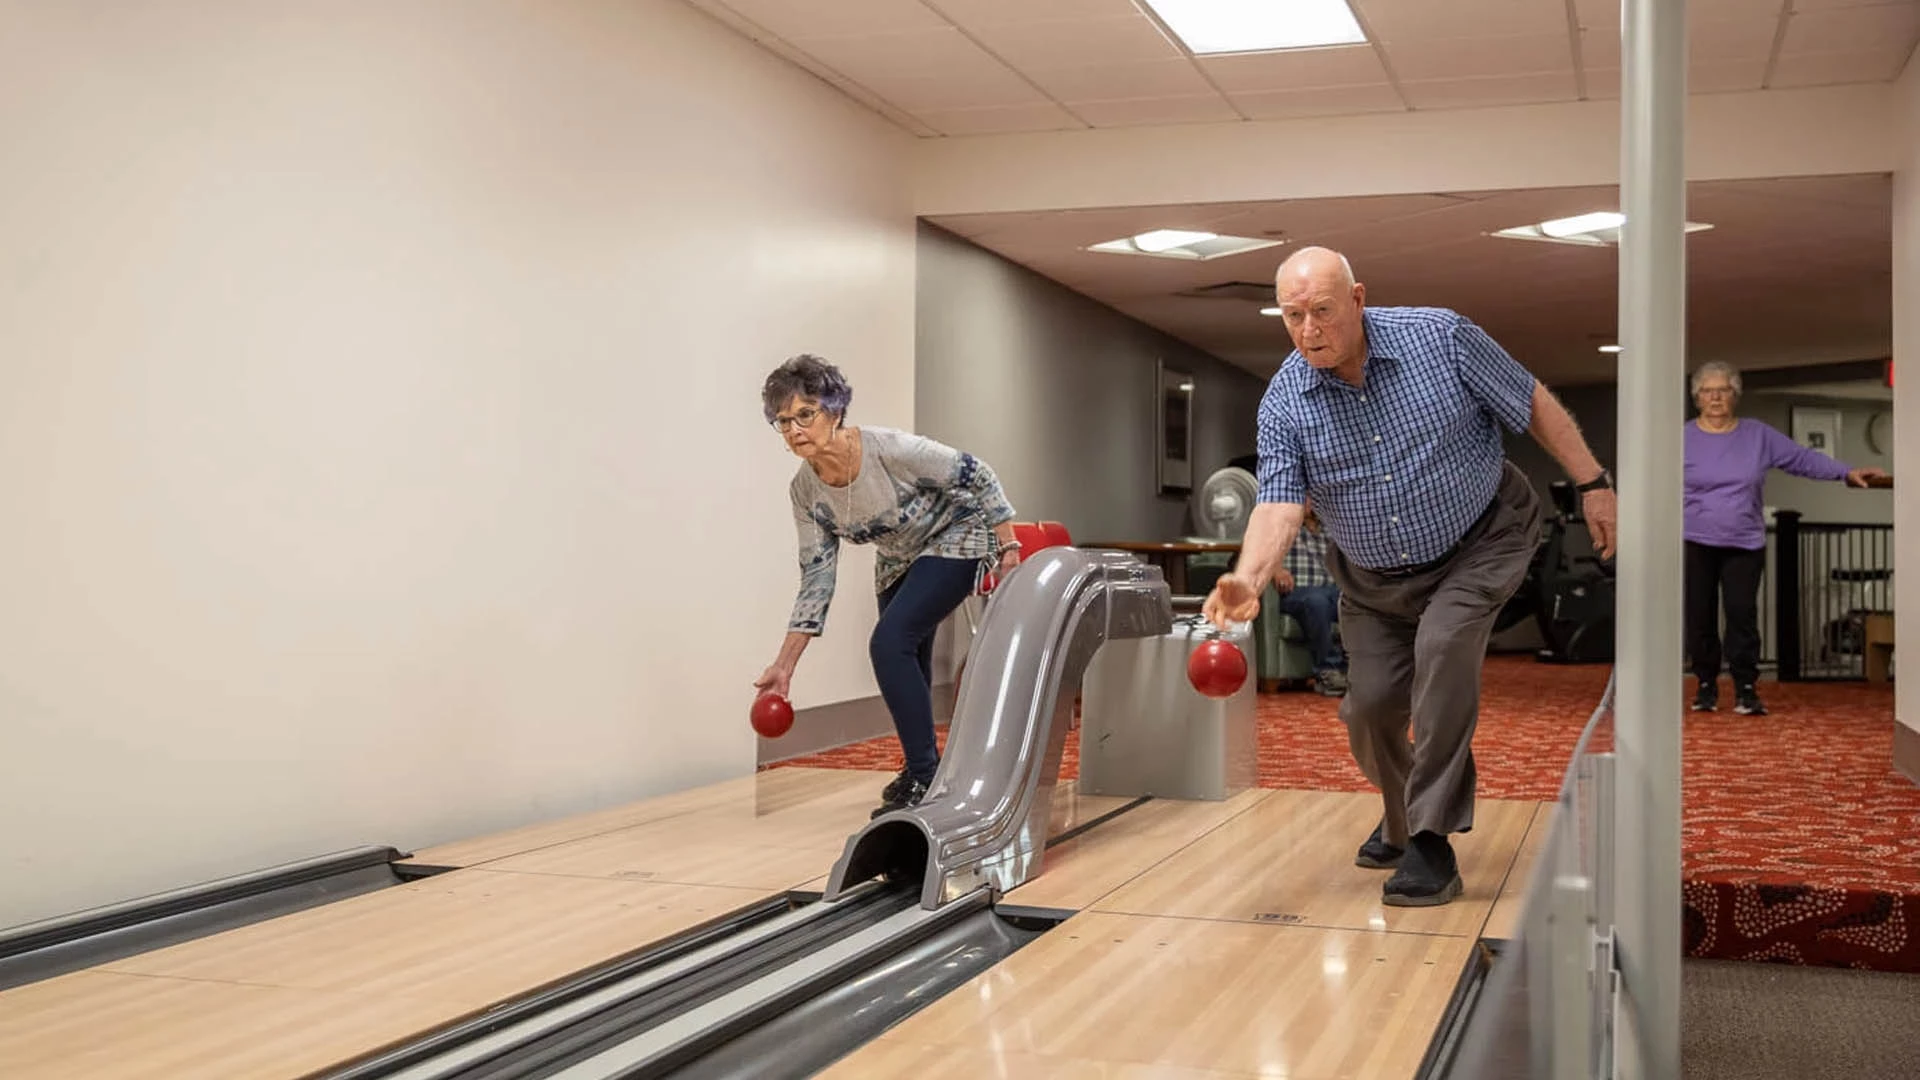 Two seniors bowling at the same time